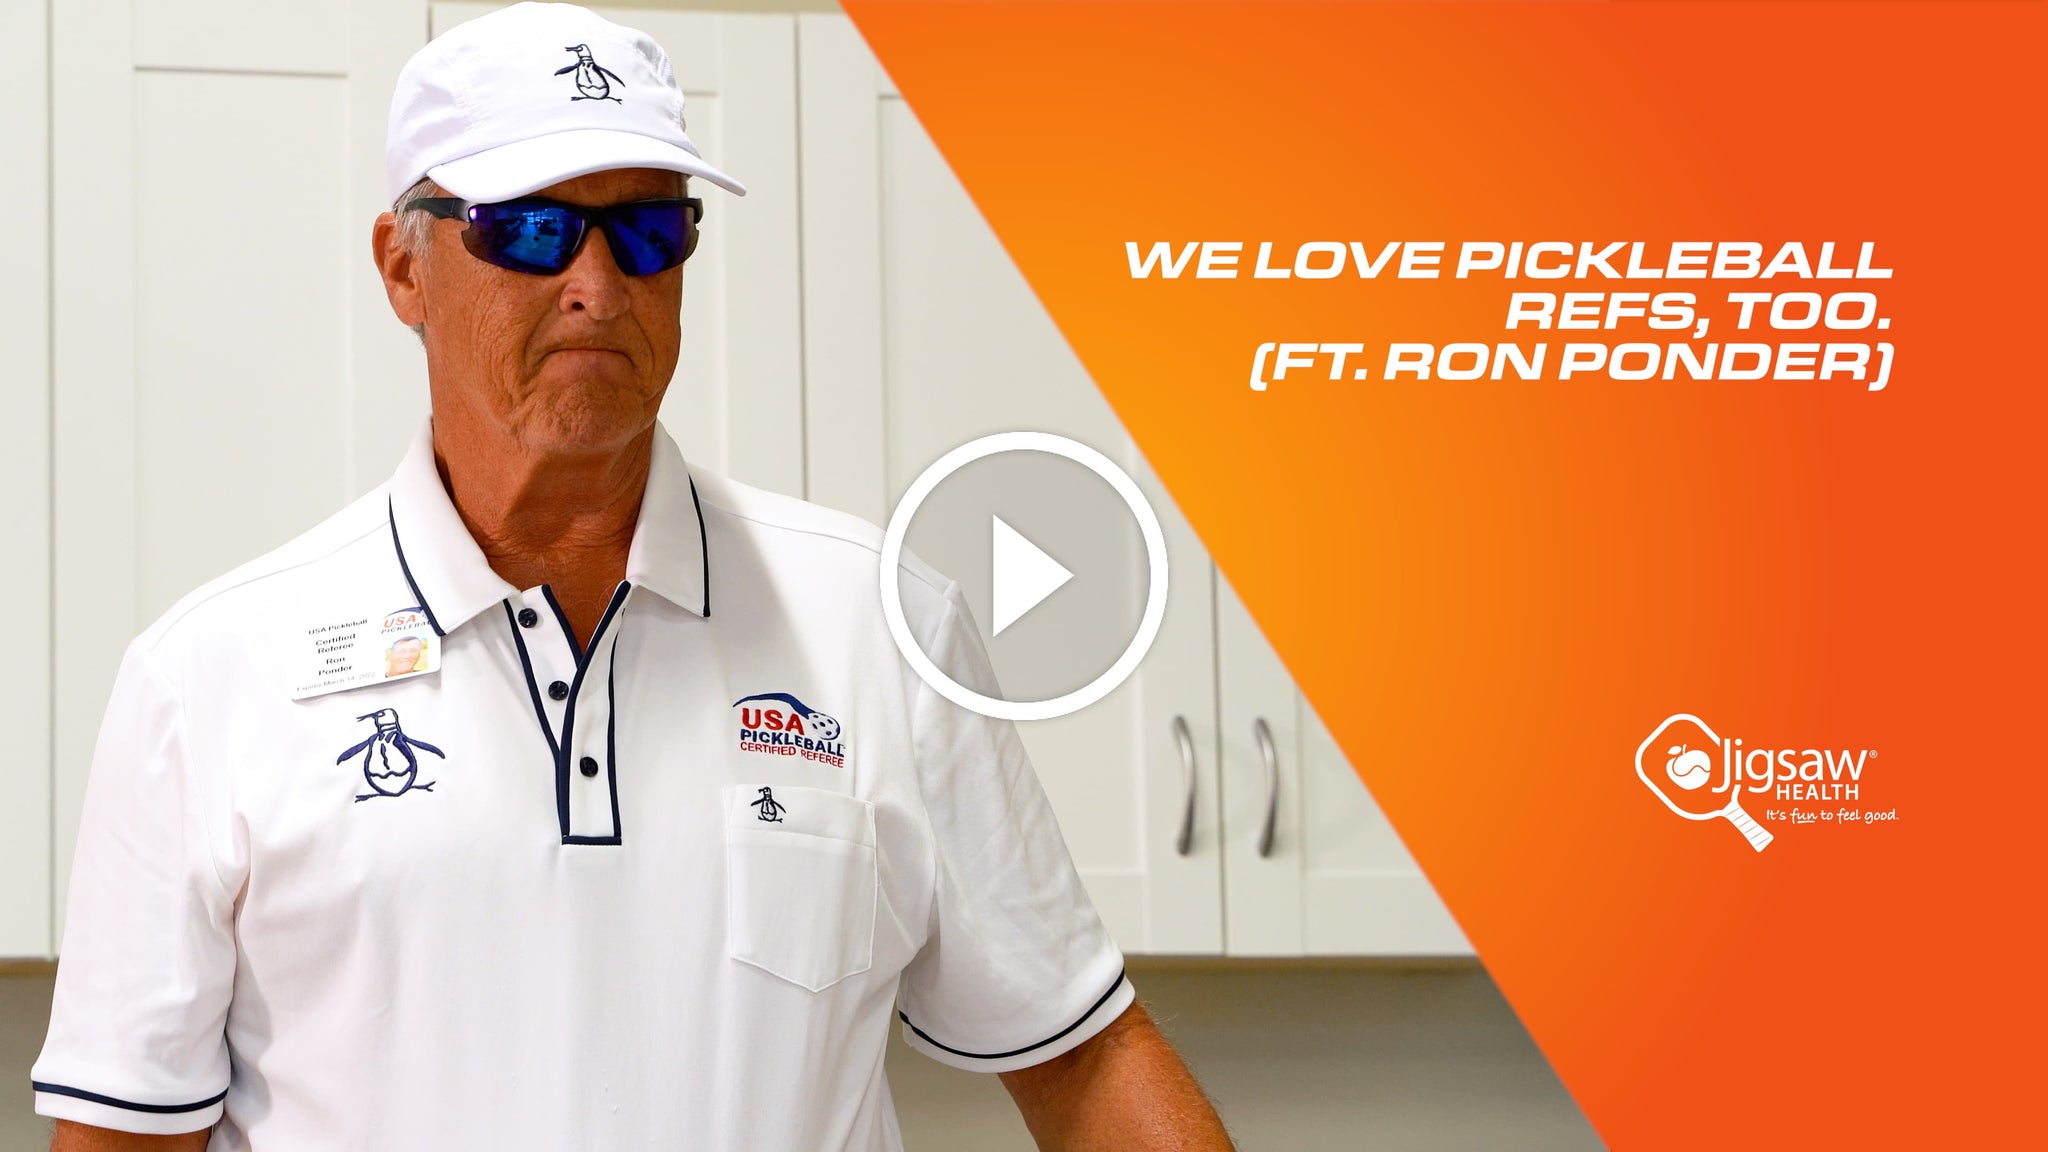 We love Pickleball Refs, Too (featuring Ron Ponder)